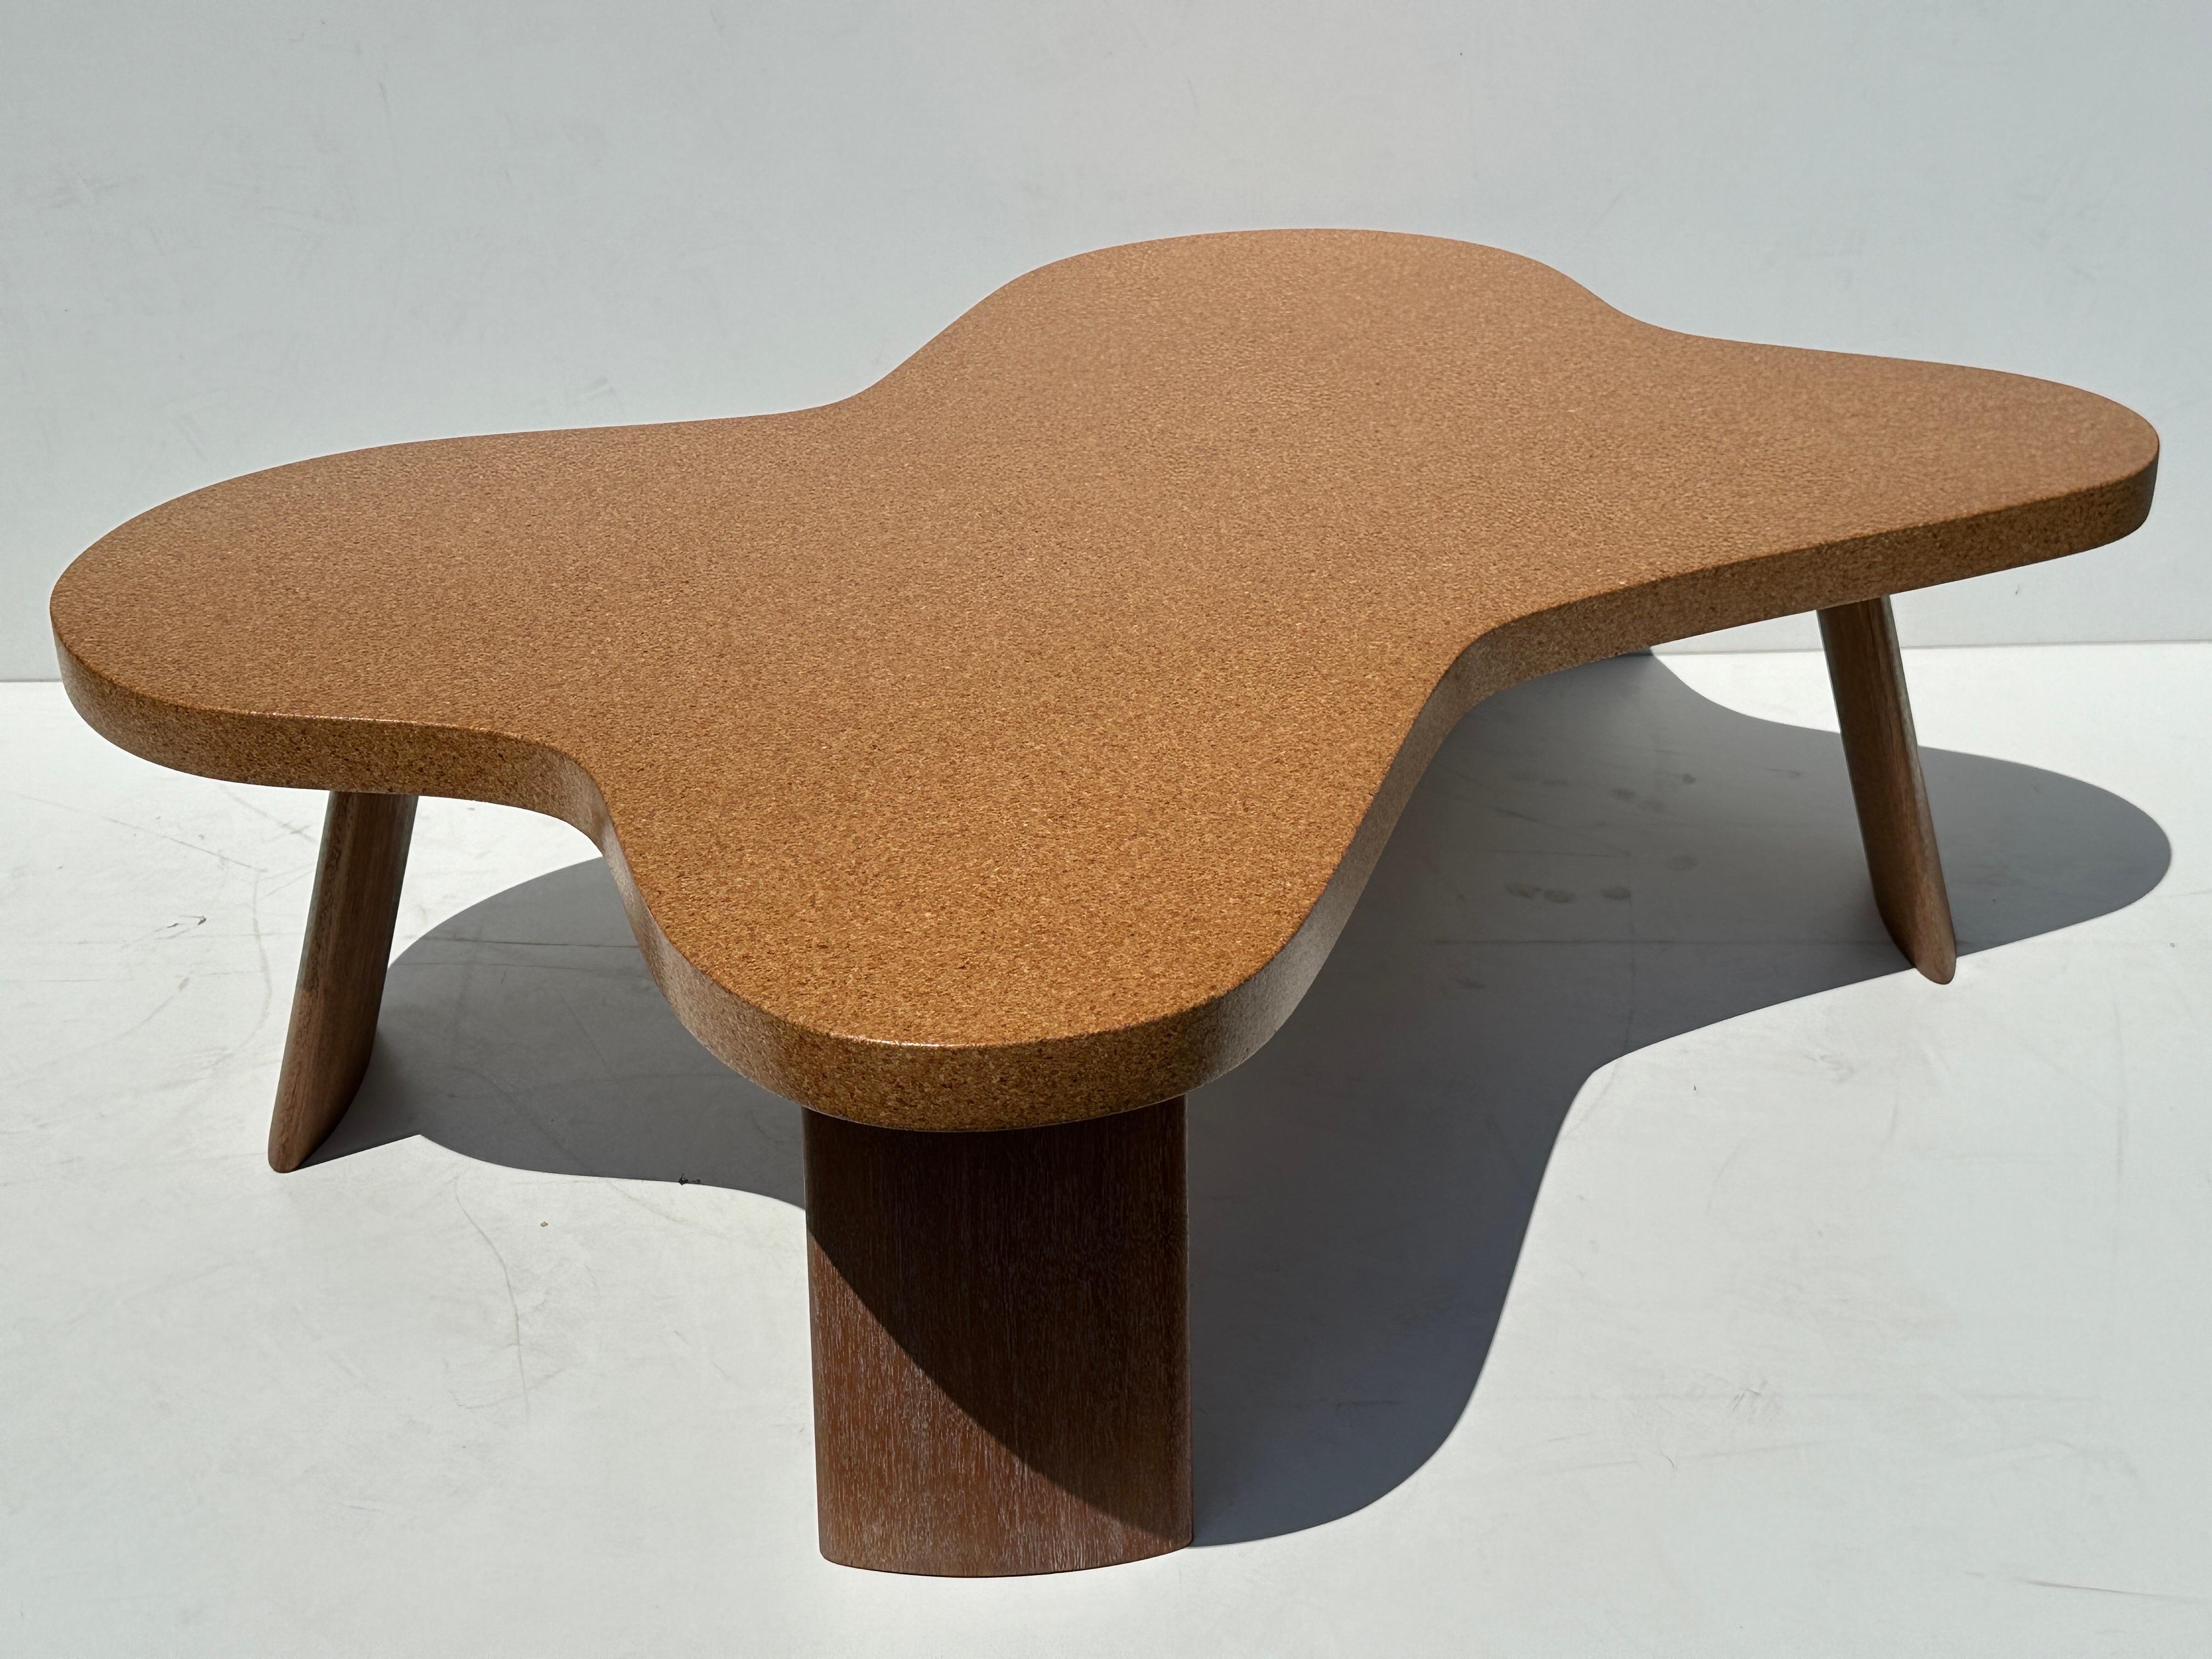 “Cloud” Cork Coffee Table In Good Condition For Sale In North Hollywood, CA